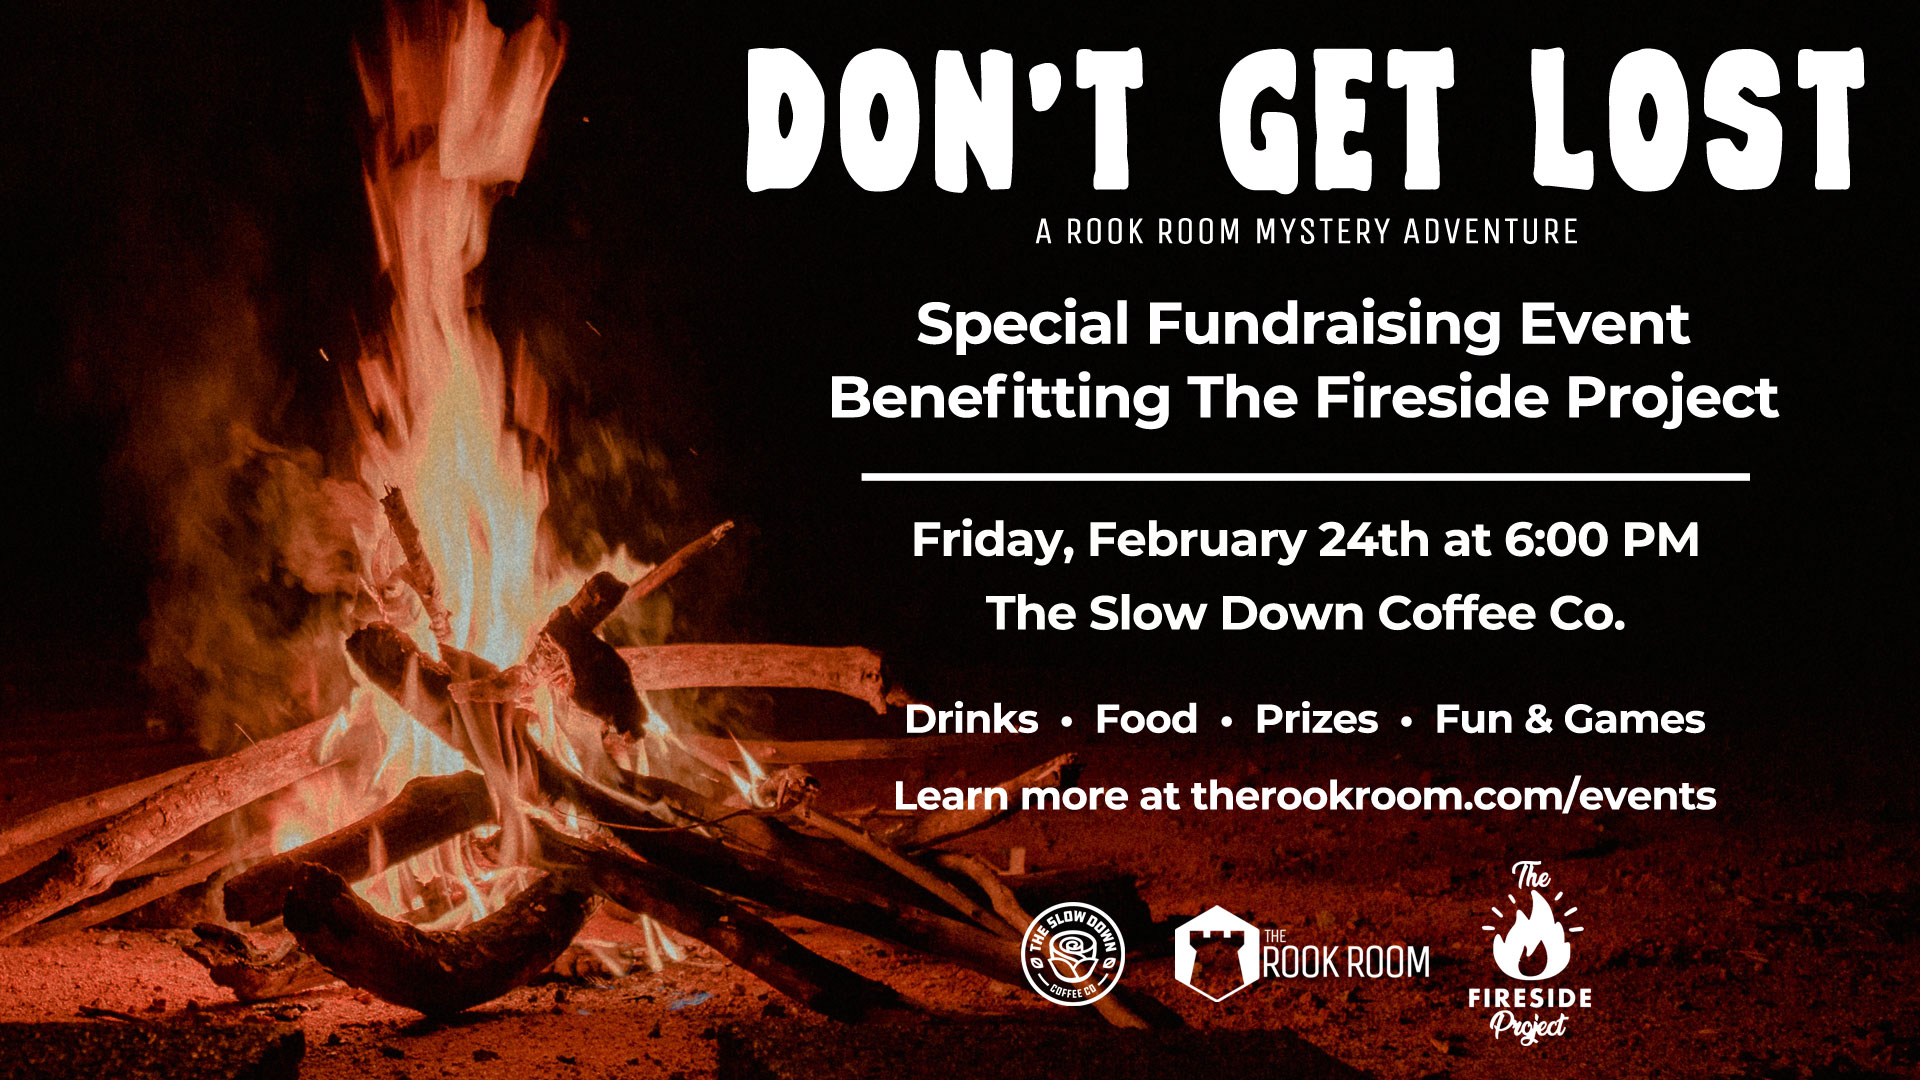 Don't Get Lost Mystery Adventure Fundraiser Event for The Fireside Project February 24, 2023